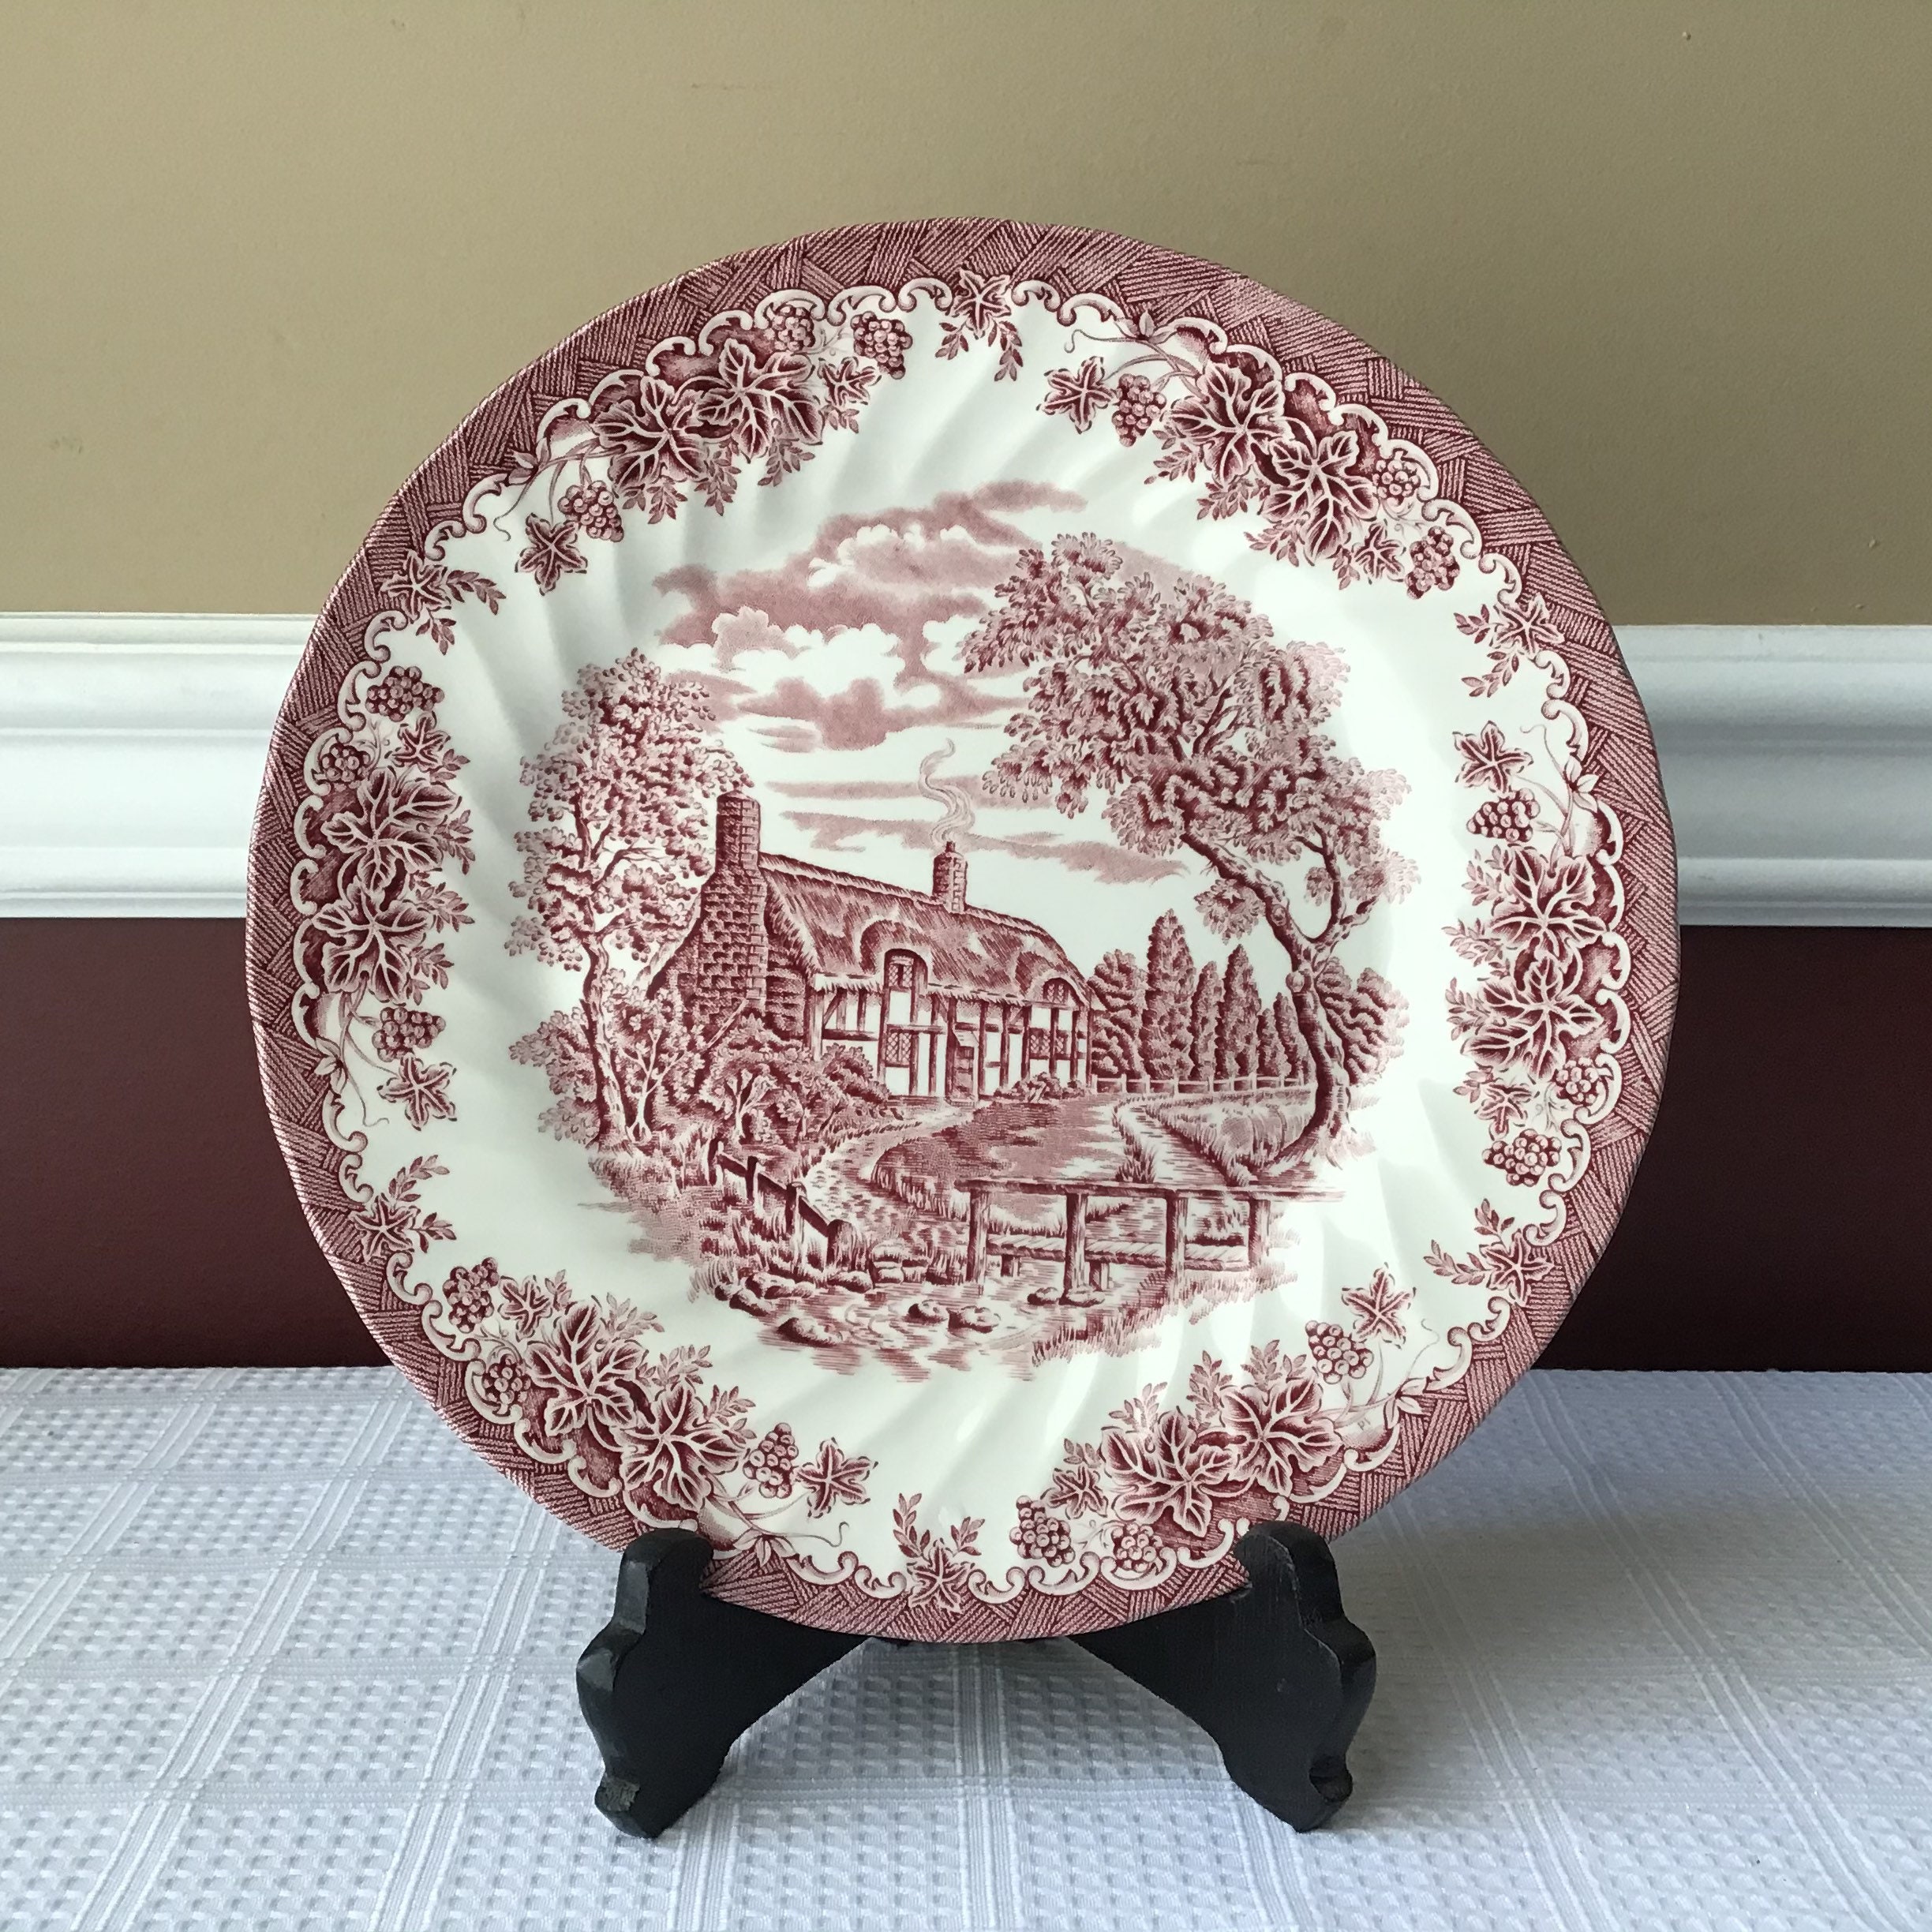 Vintage Churchill Porcelain Plate Made in England, 10 